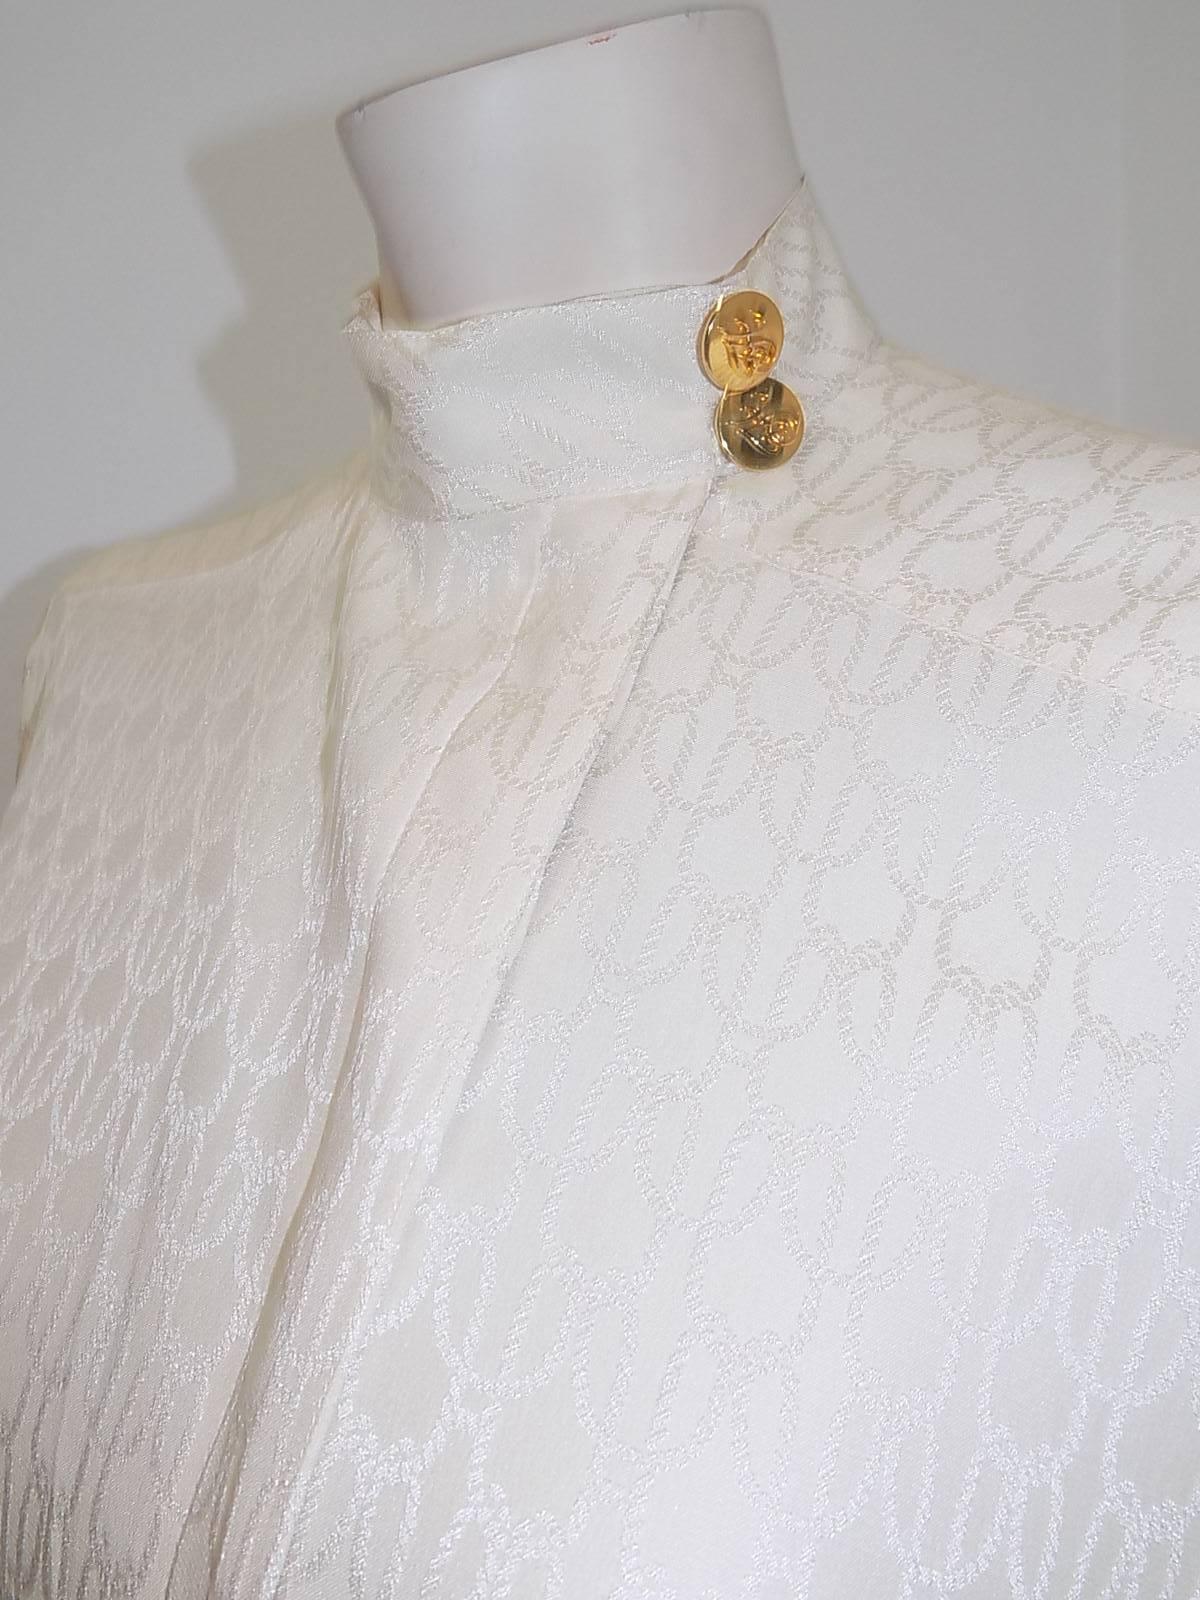 Gray Hermes Stunning Jacquard silk print creme blouse w gold buttons For Sale